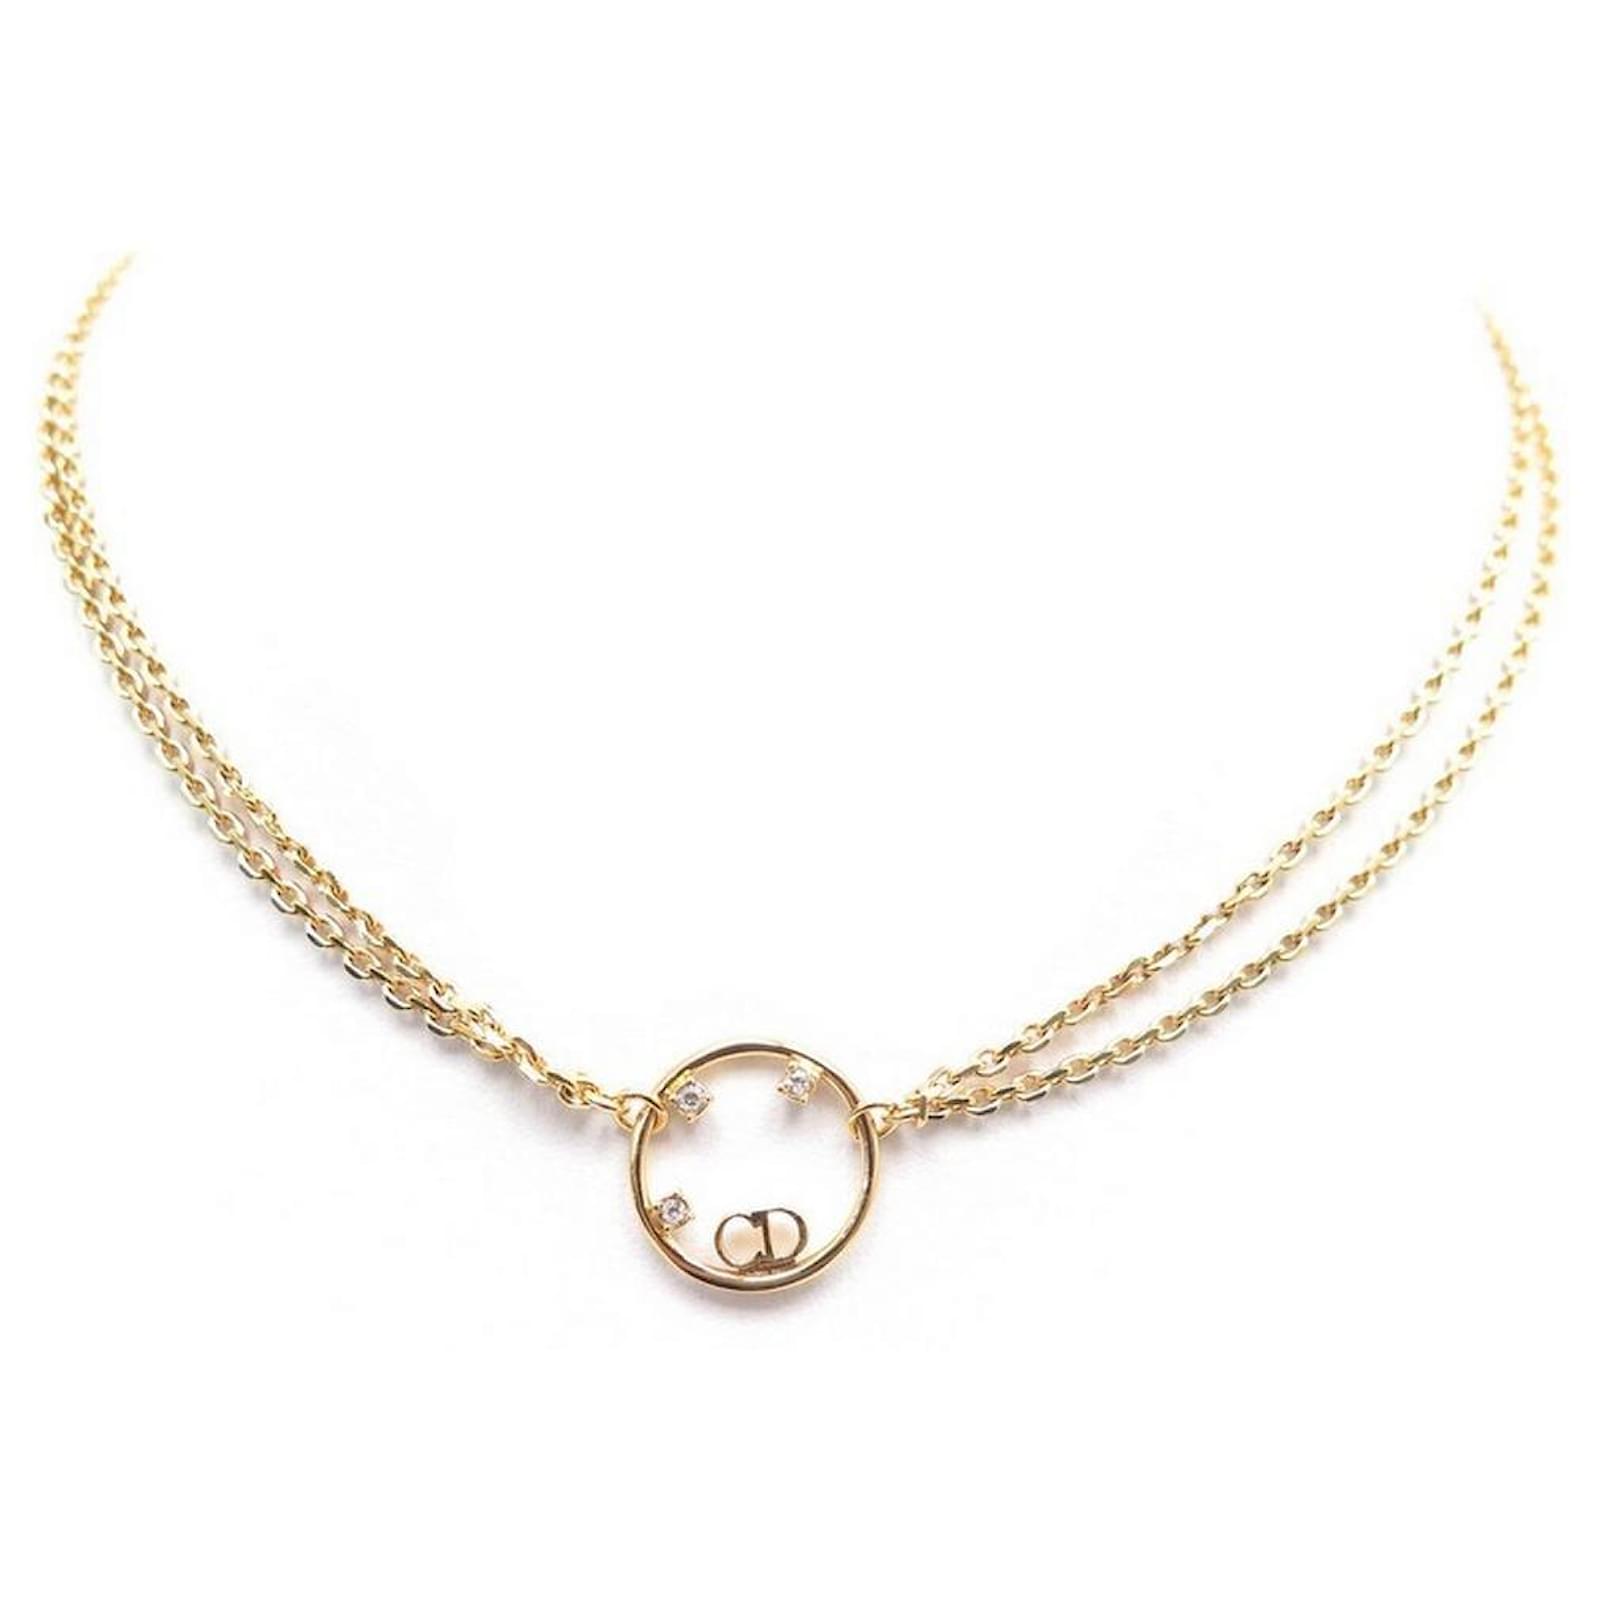 Petit cd necklace Dior Gold in Metal - 40192842